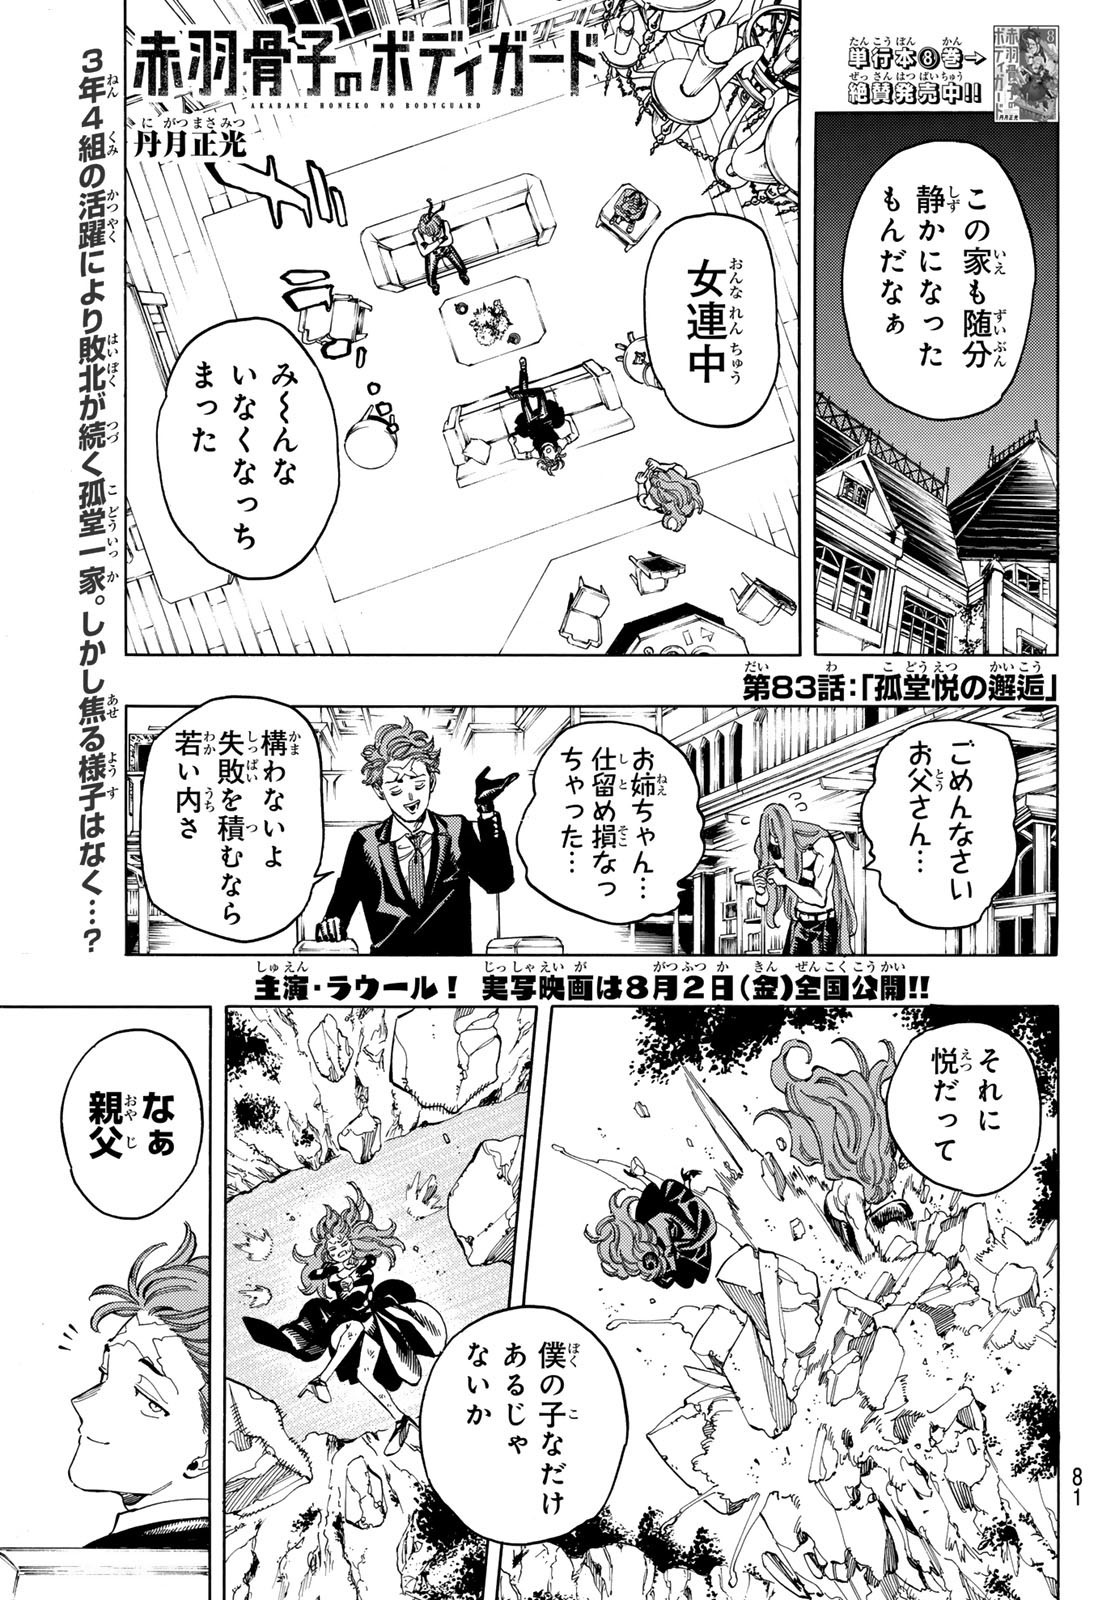 Weekly Shōnen Magazine - 週刊少年マガジン - Chapter 2024-28 - Page 78